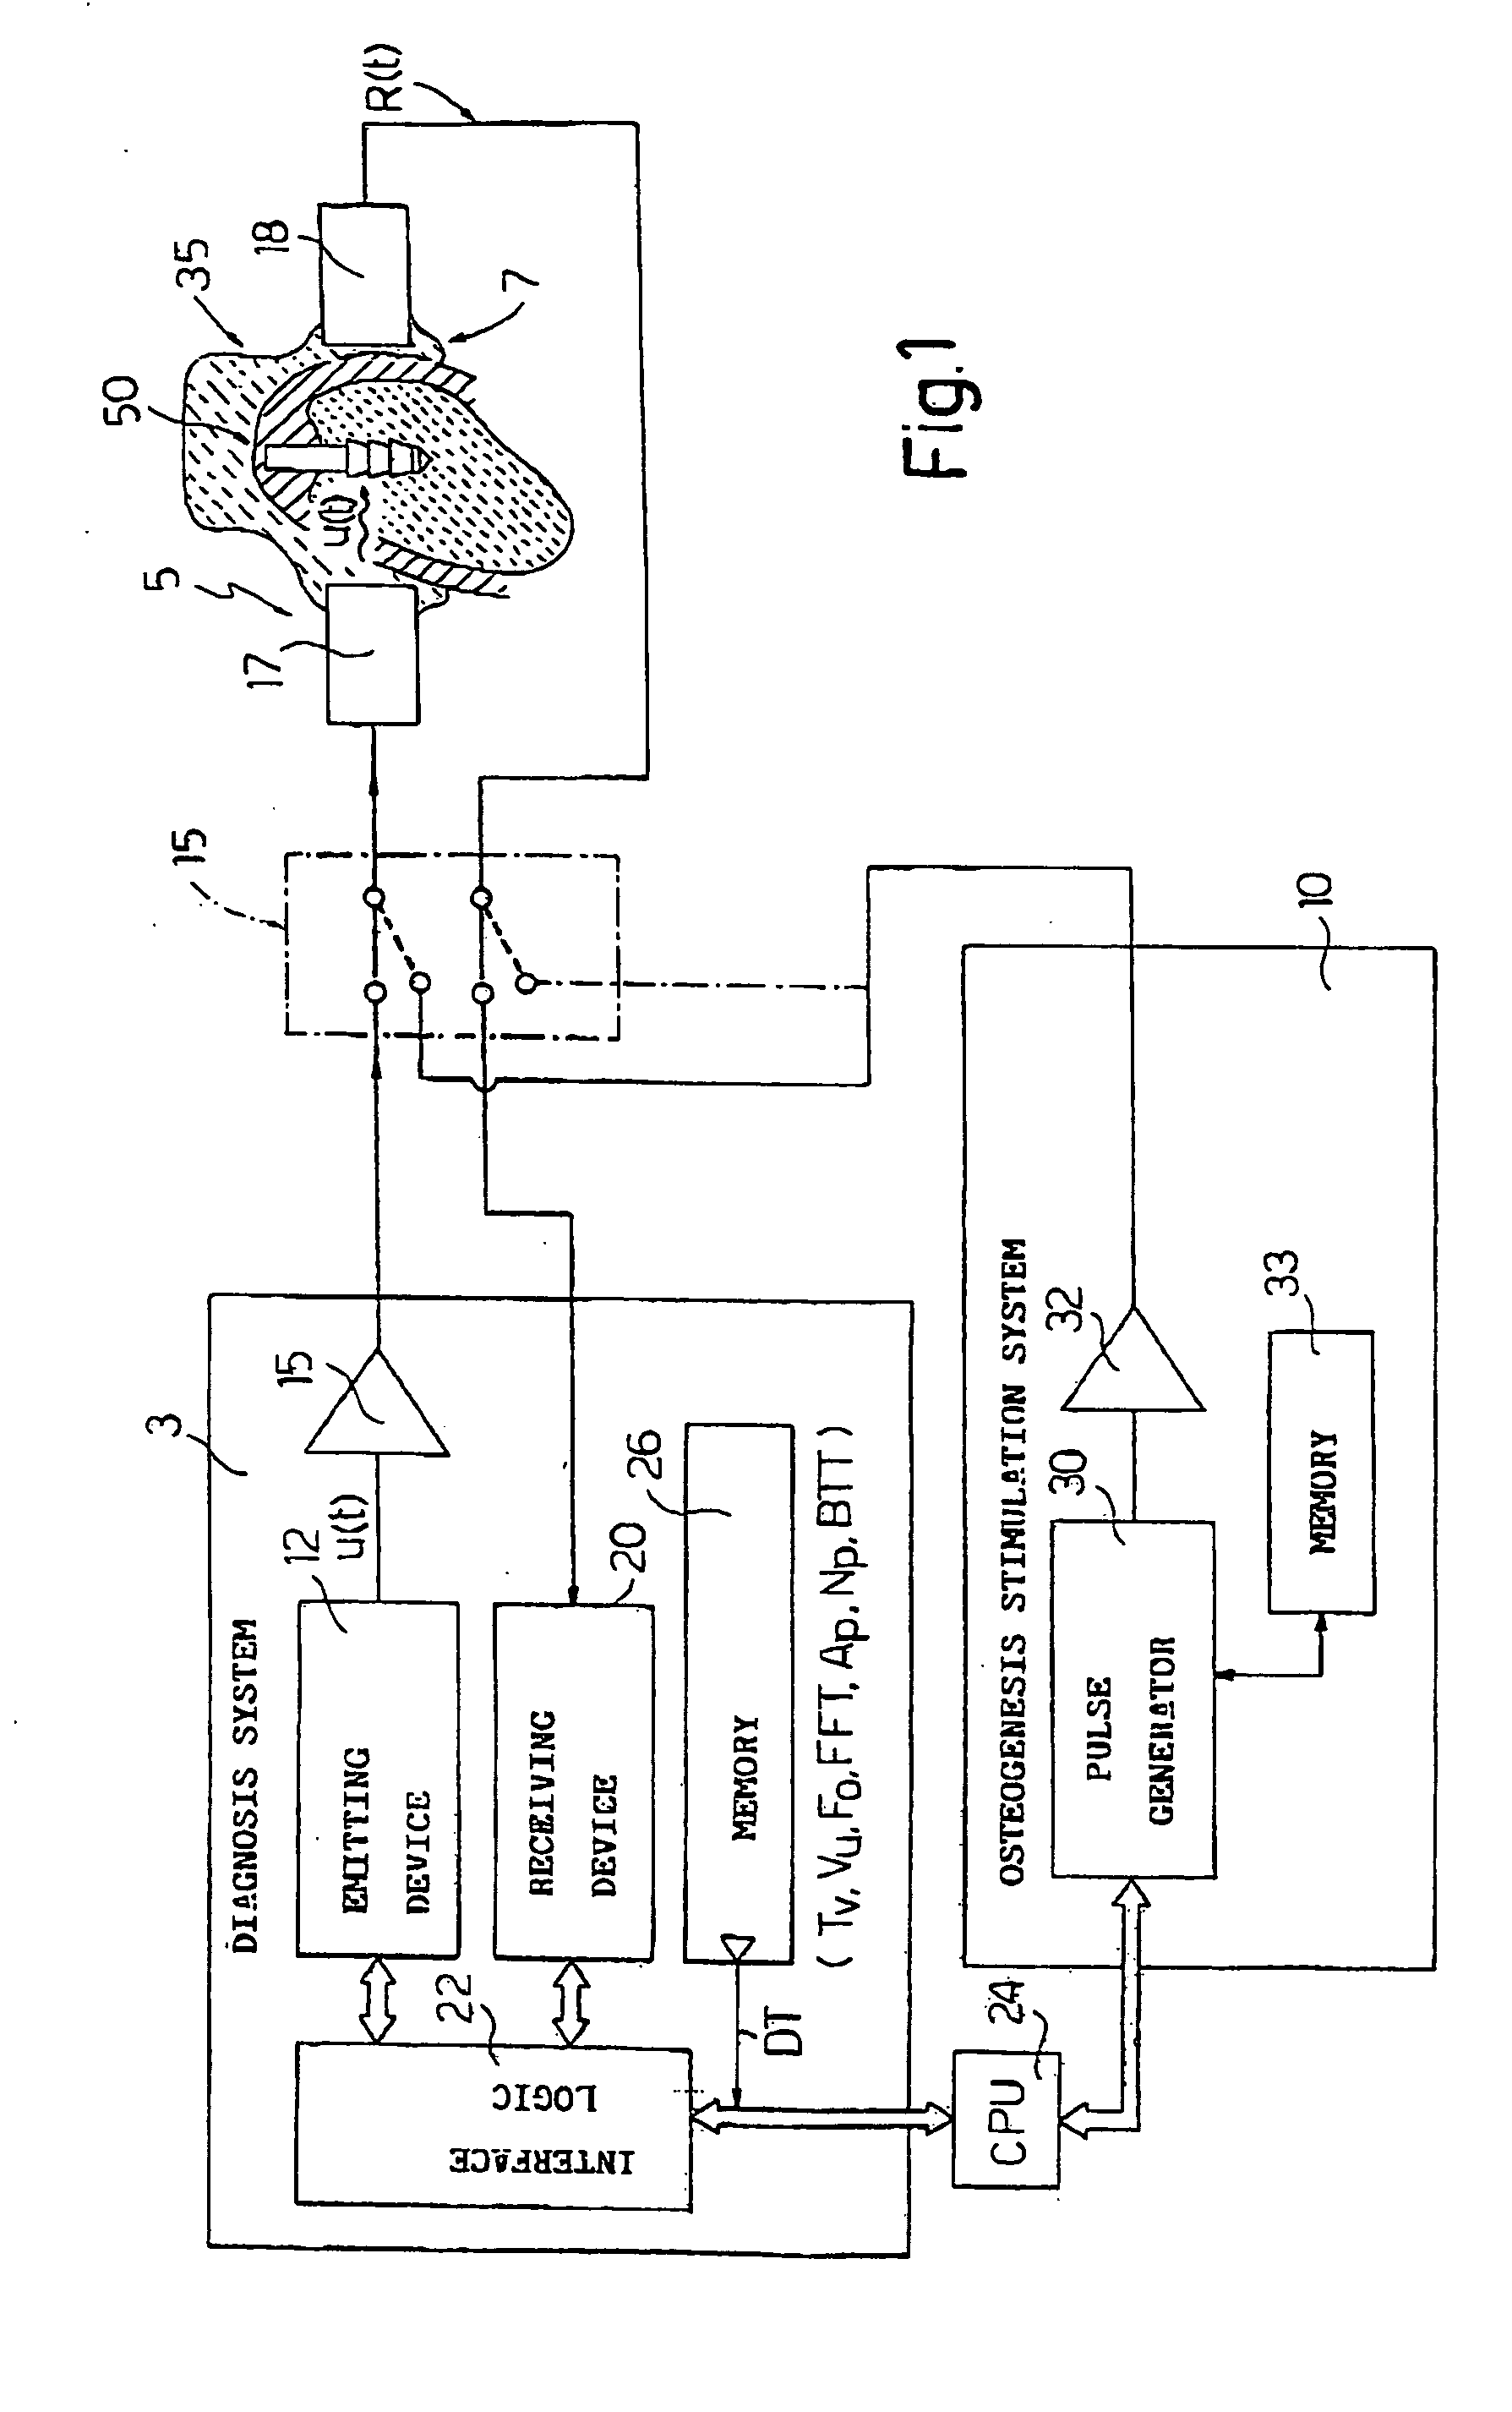 Electronic system for determining the density and structure of bone tissue and stimulating osteogenesis in dentistry